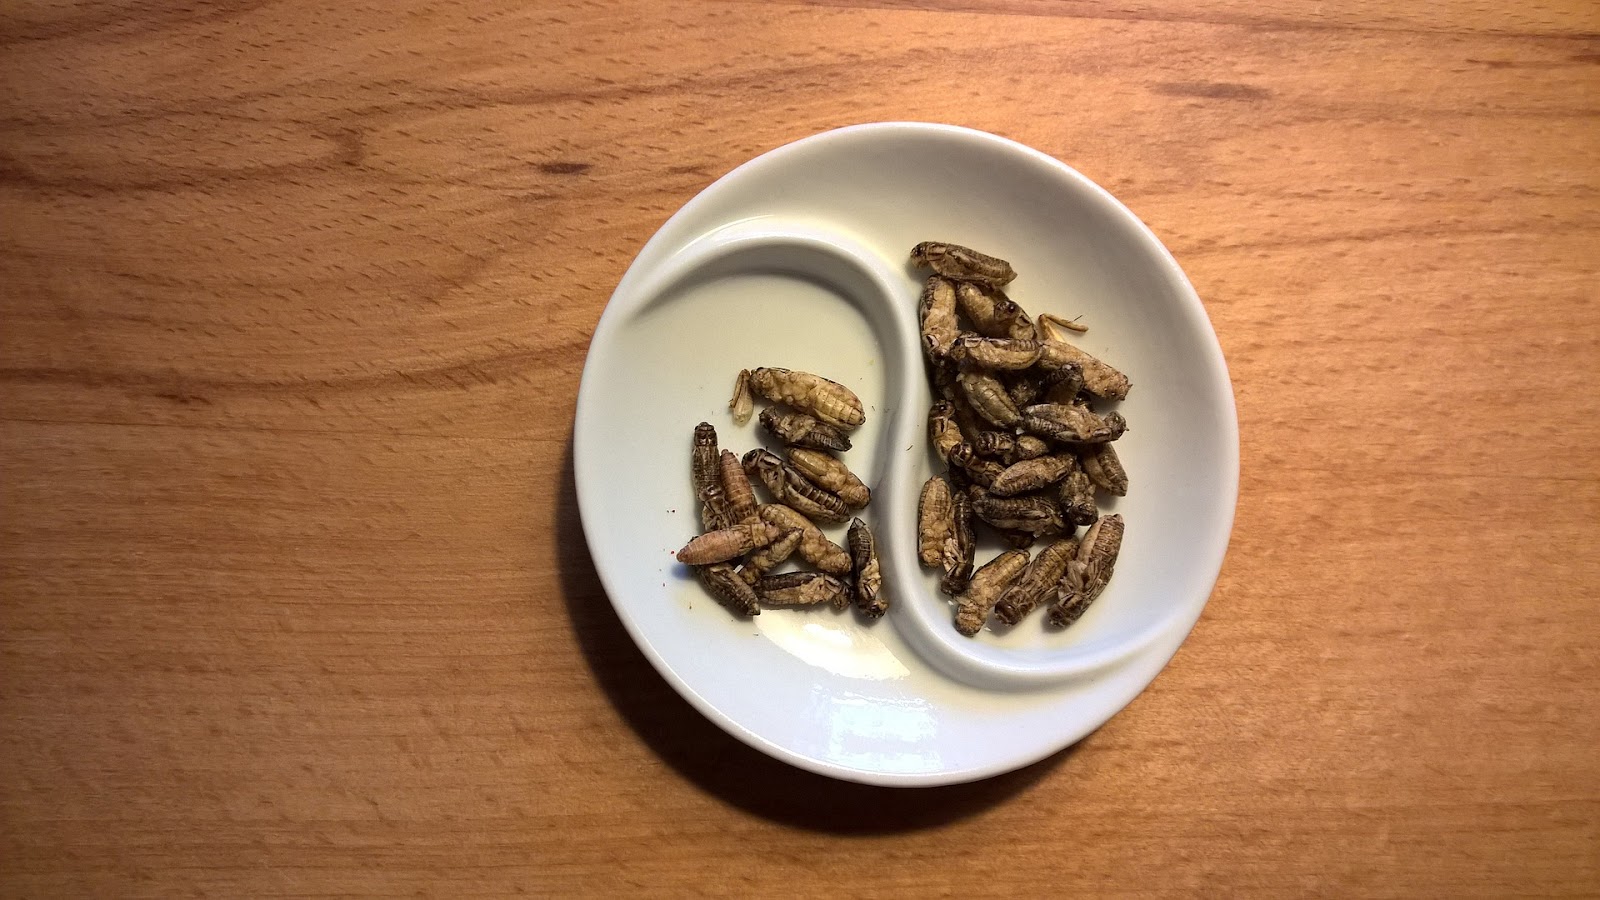 Plate of bbq roasted crickets